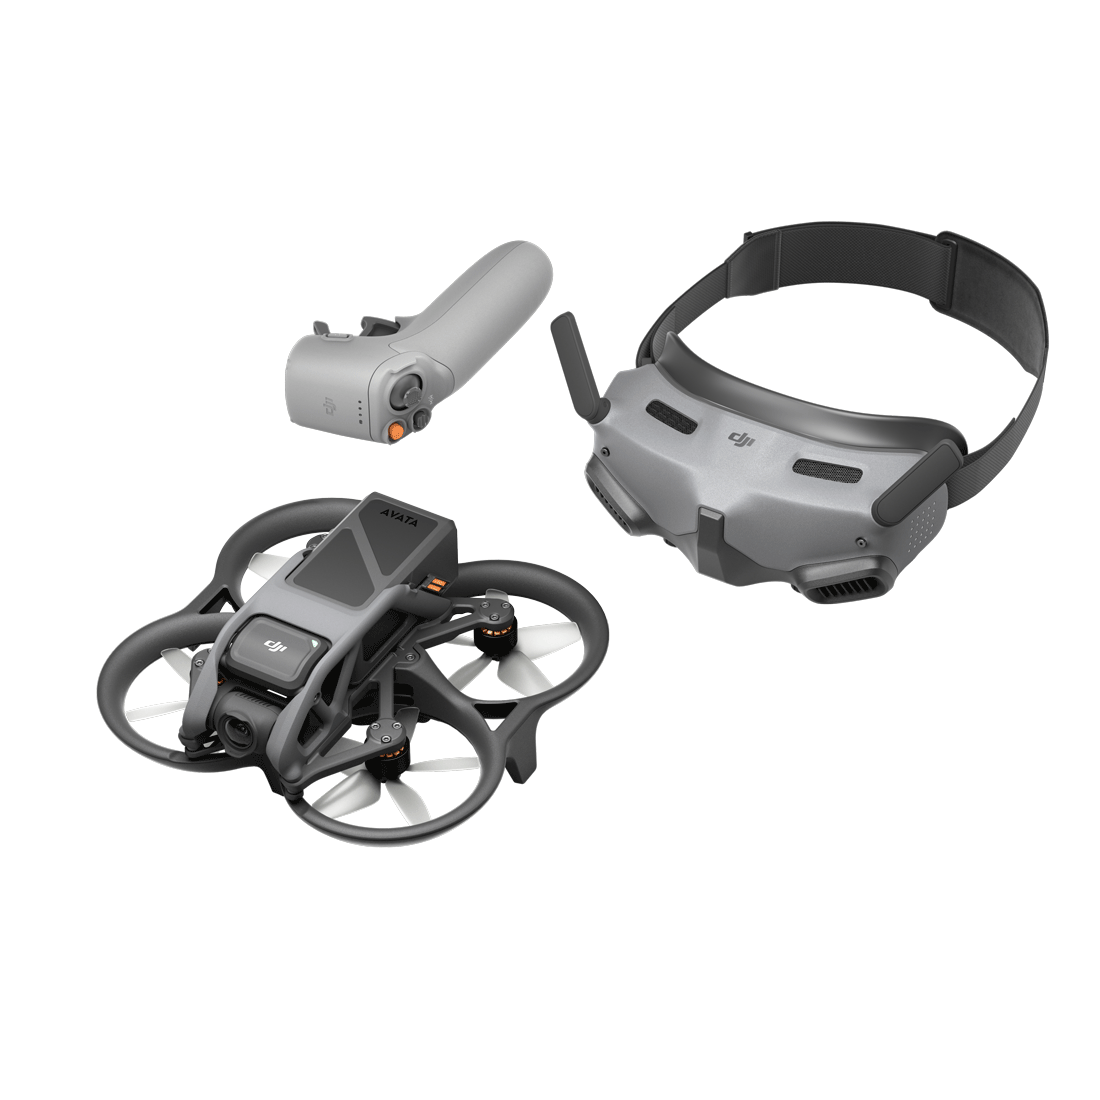 DJI Avata Pro-View Combo (DJI Goggles 2) - With RC Motion 2 Flymore Kit, 3  batteries First-Person View Drone UAV Quadcopter with 4K Stabilized Video